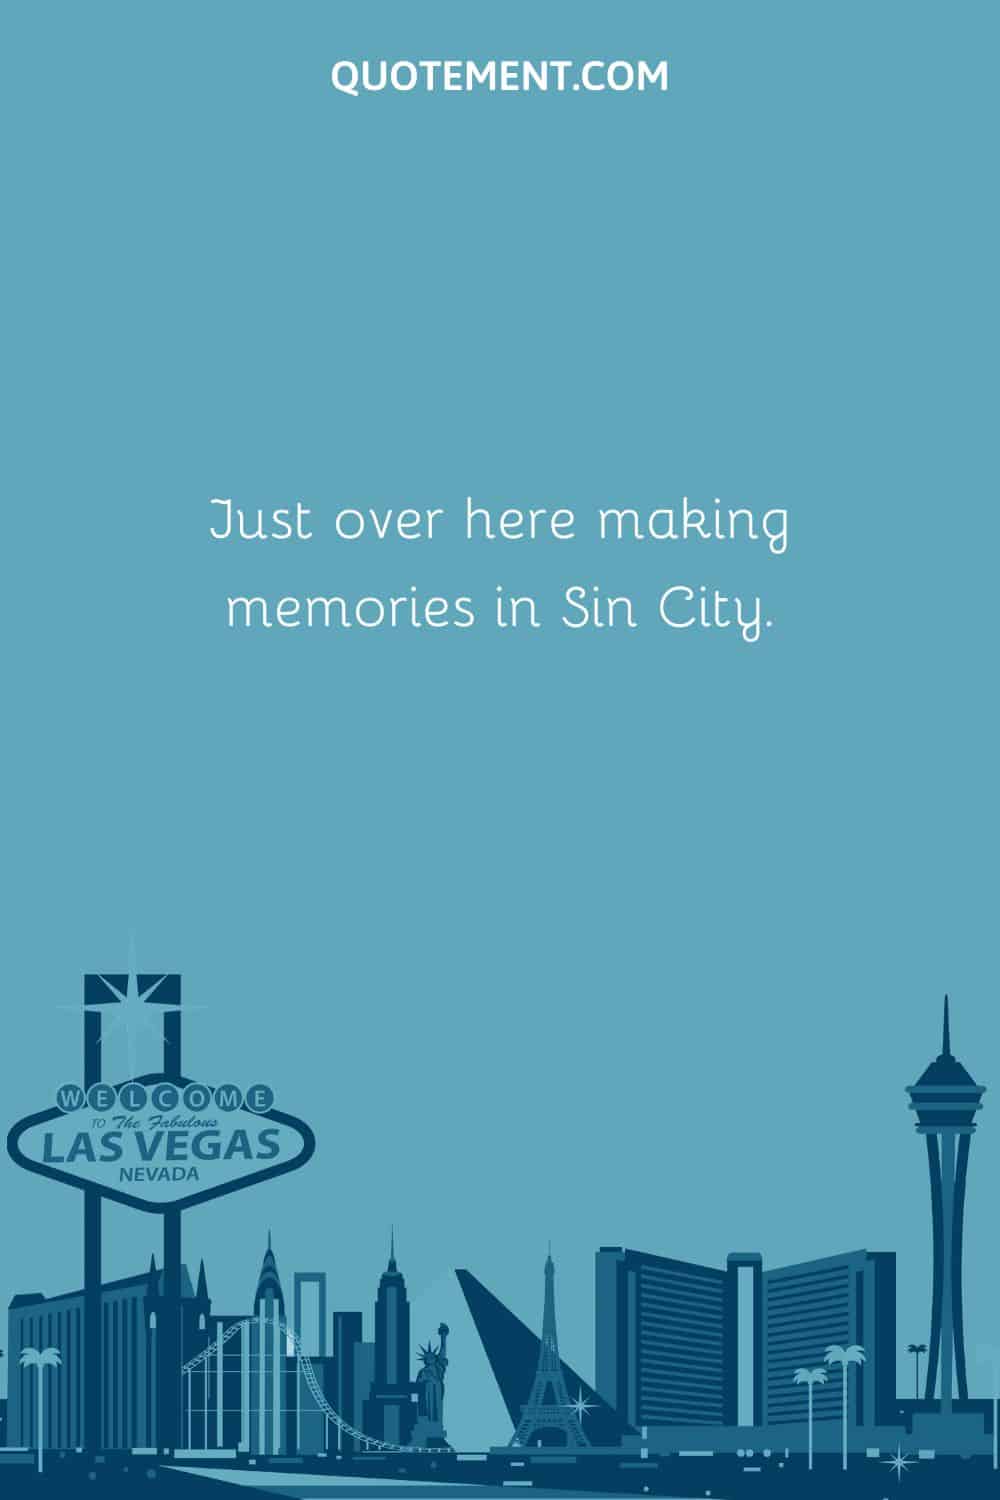 Just over here making memories in Sin City.